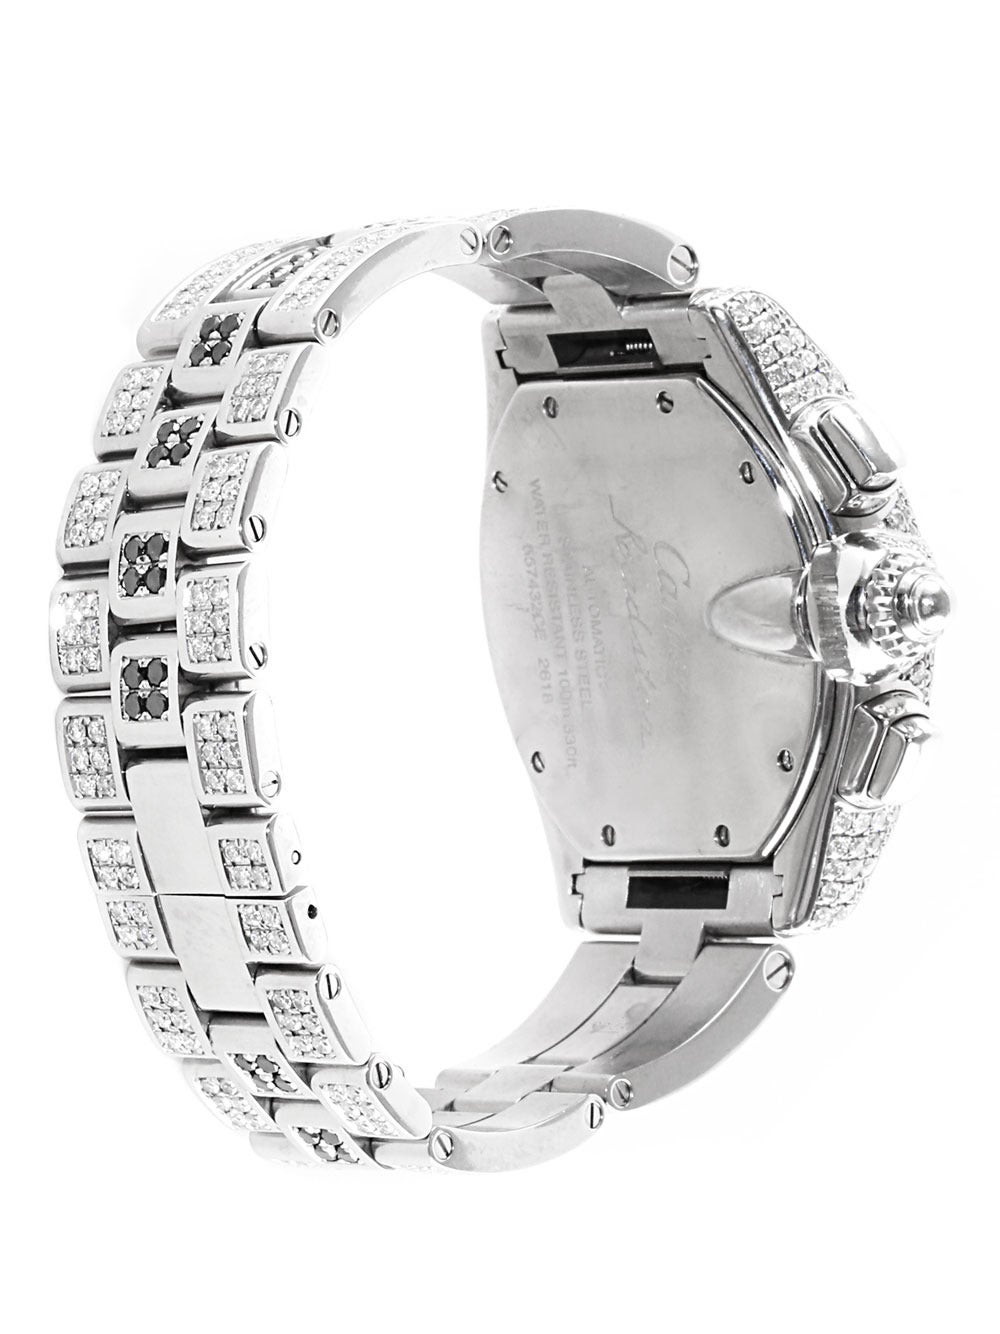 Cartier Roadster chronograph watch custom set with 13.3ct of round brilliant white and black diamonds.

Made of Stainless Steel
Collection: Roadster Chronograph
Stones: Black and White Diamonds
Dimensions: 48mm Wide (1.88 Inches) (Measured with